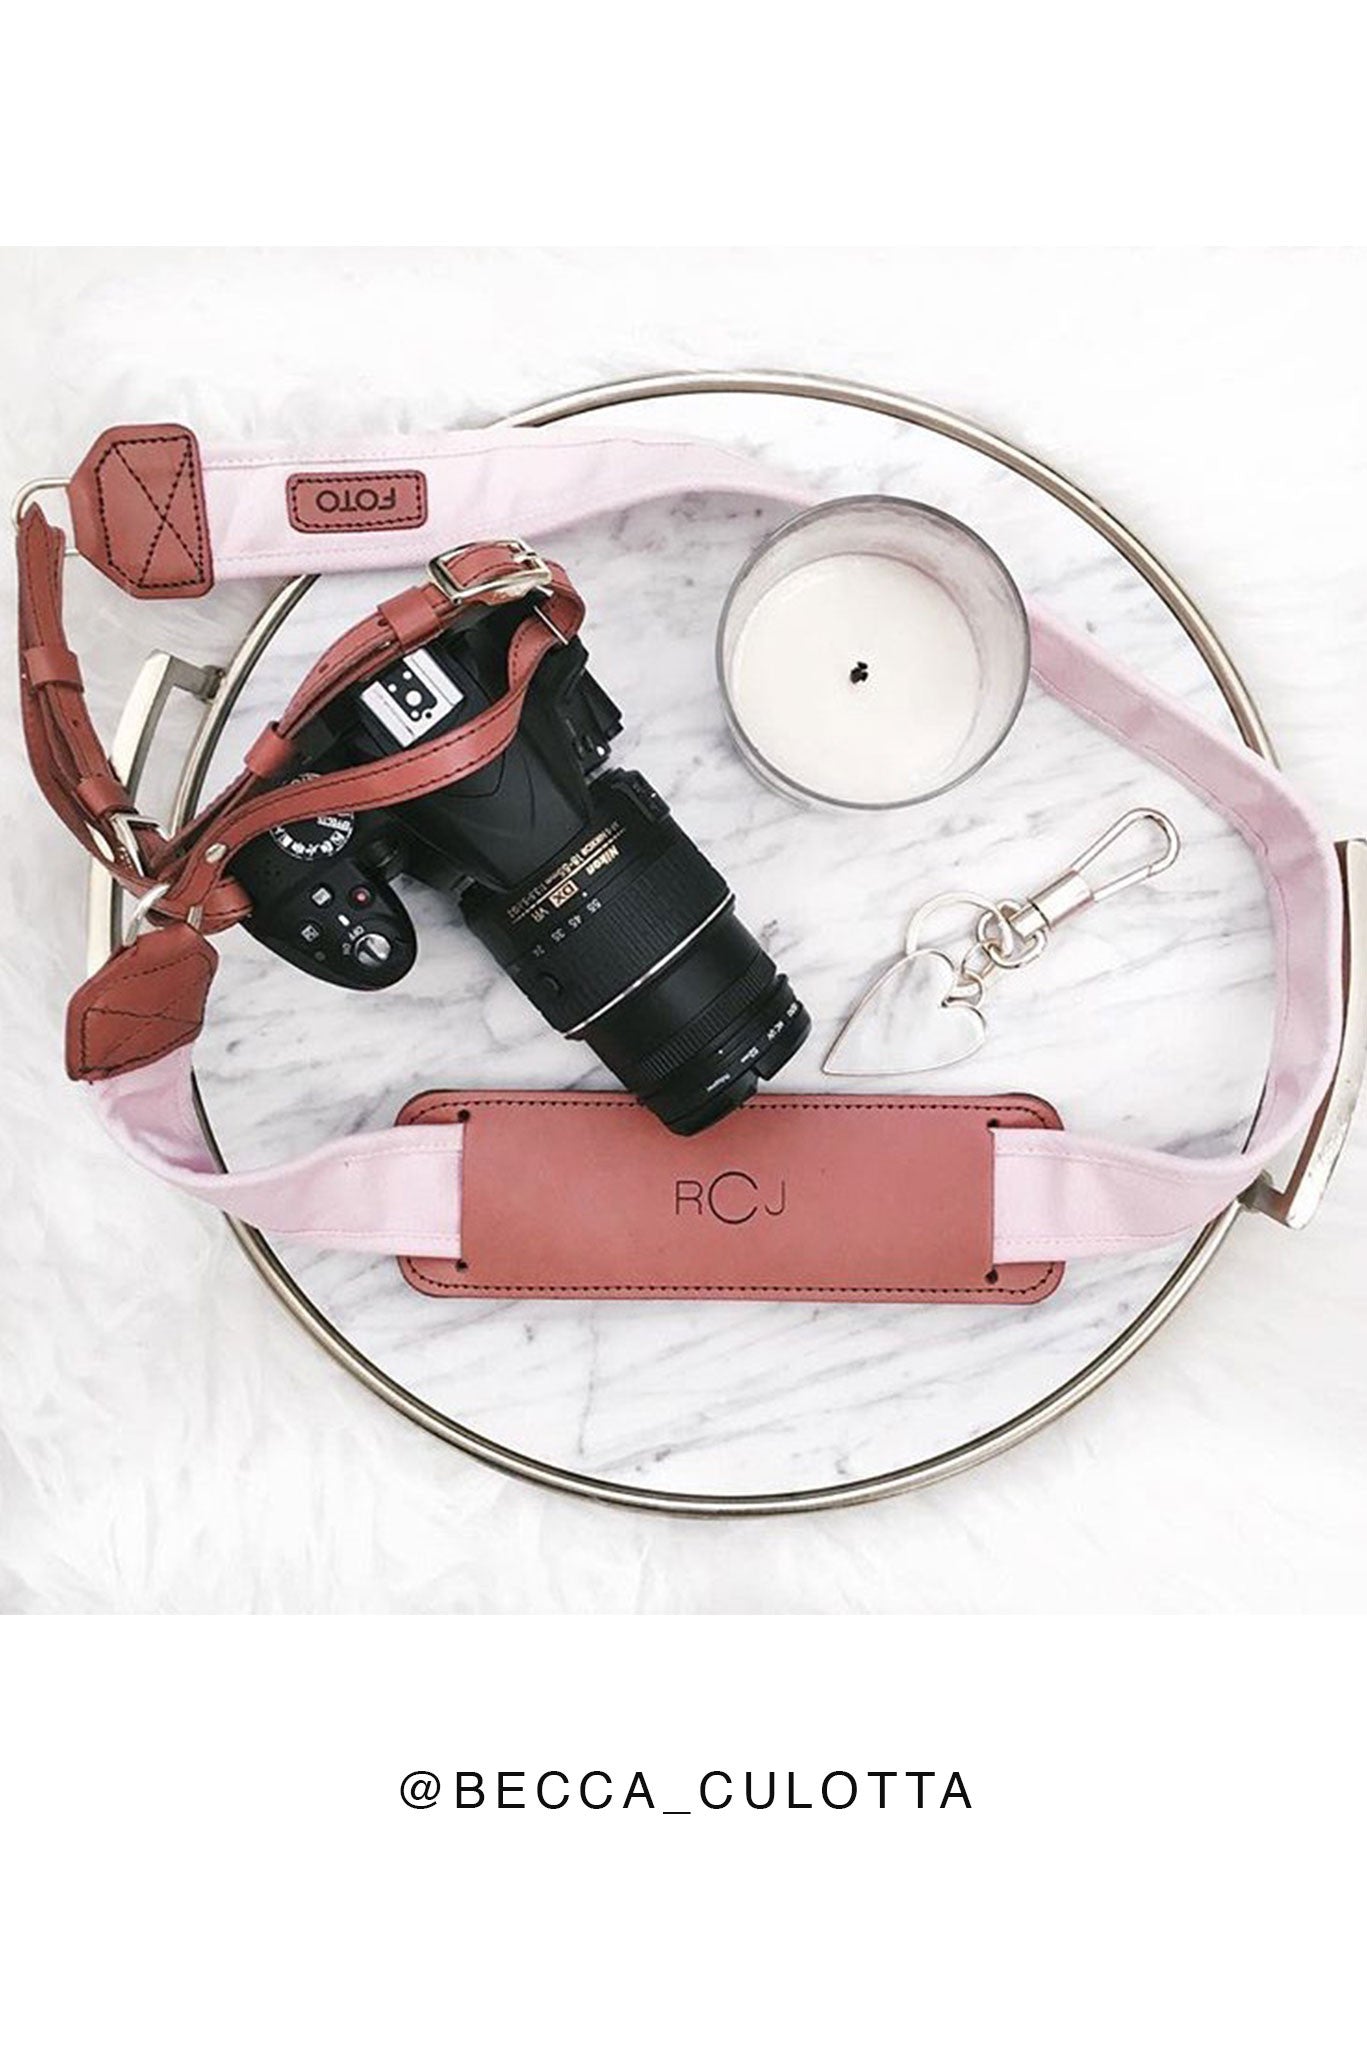 Personalized Leather Camera Strap Gift Custom Strap for Photographers DSLR  Camera Holder Gift for Him Gift for Her 